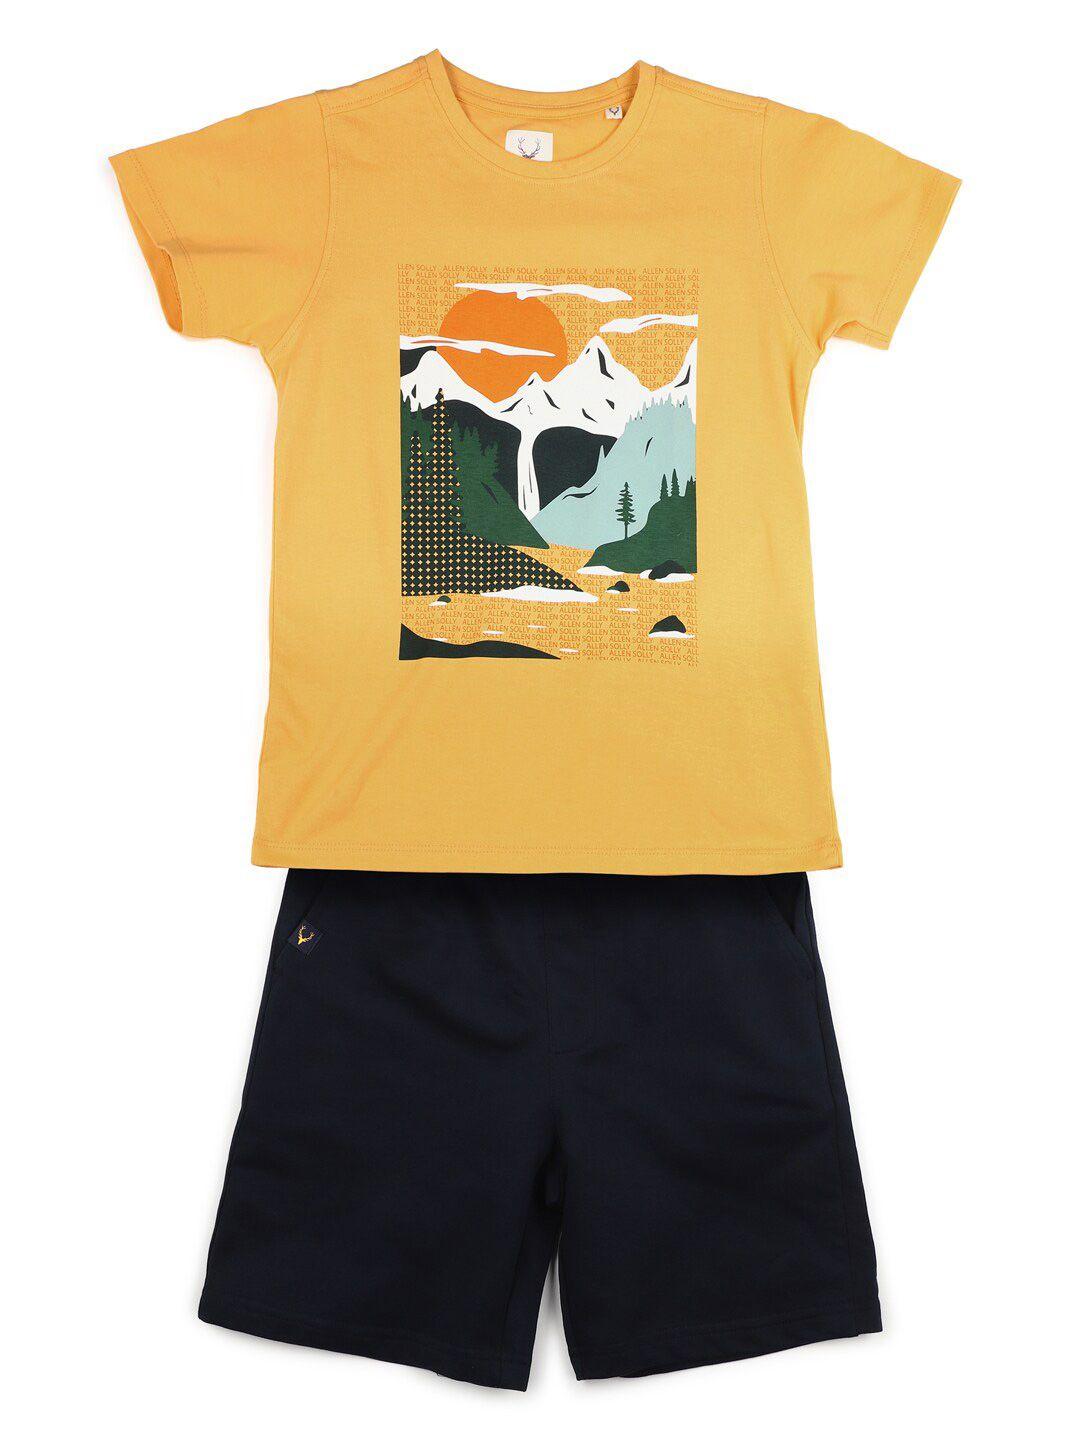 allen-solly-junior-boys-yellow-&-black-printed-pure-cotton-t-shirt-with-shorts